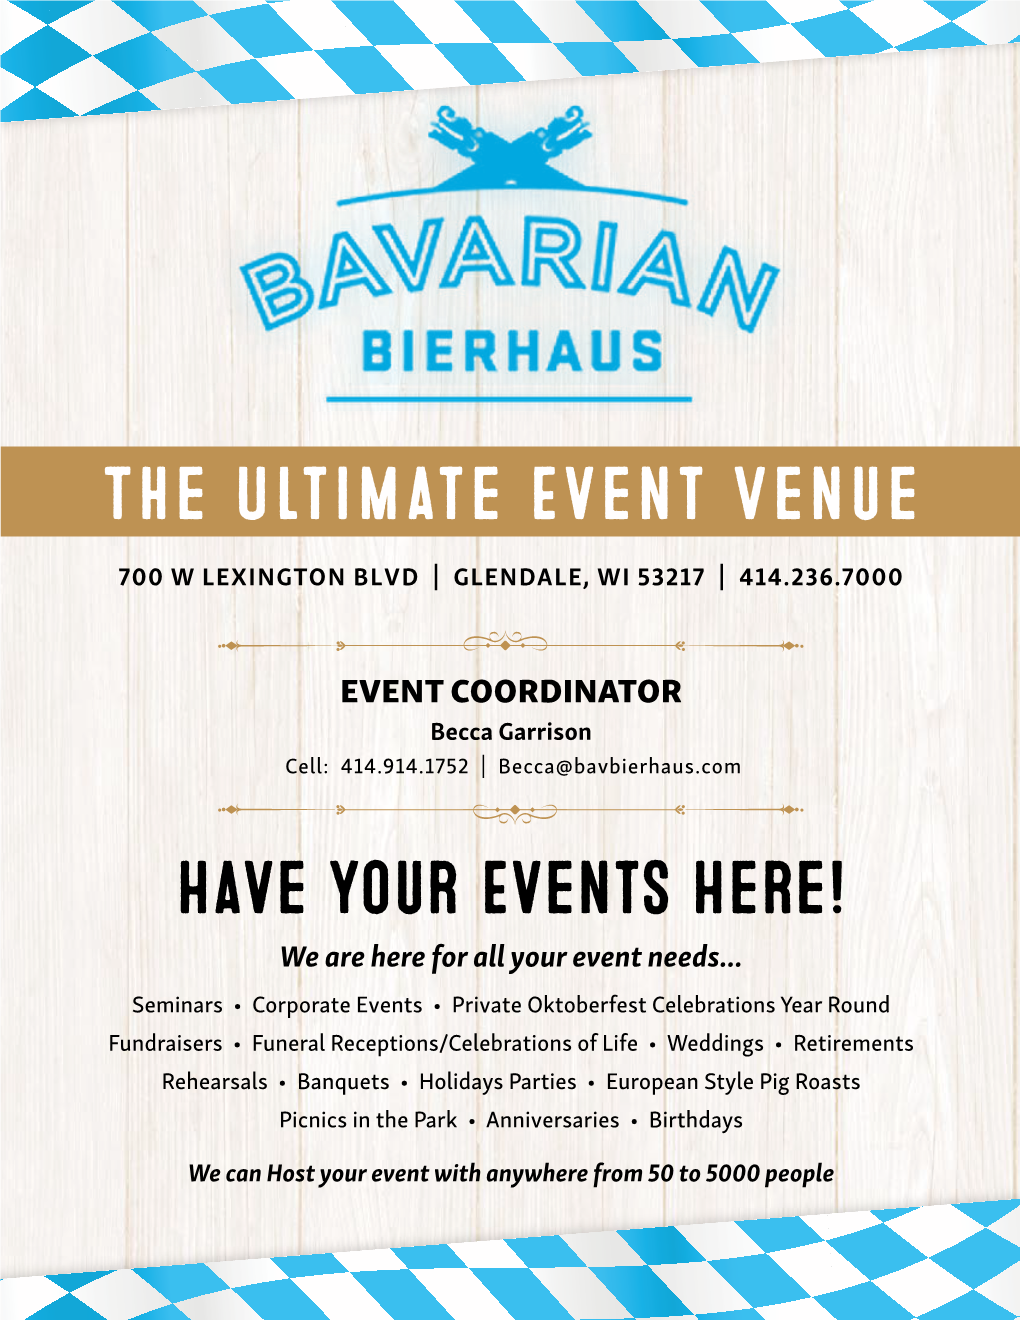 The Ultimate Event Venue Have Your Events Here!